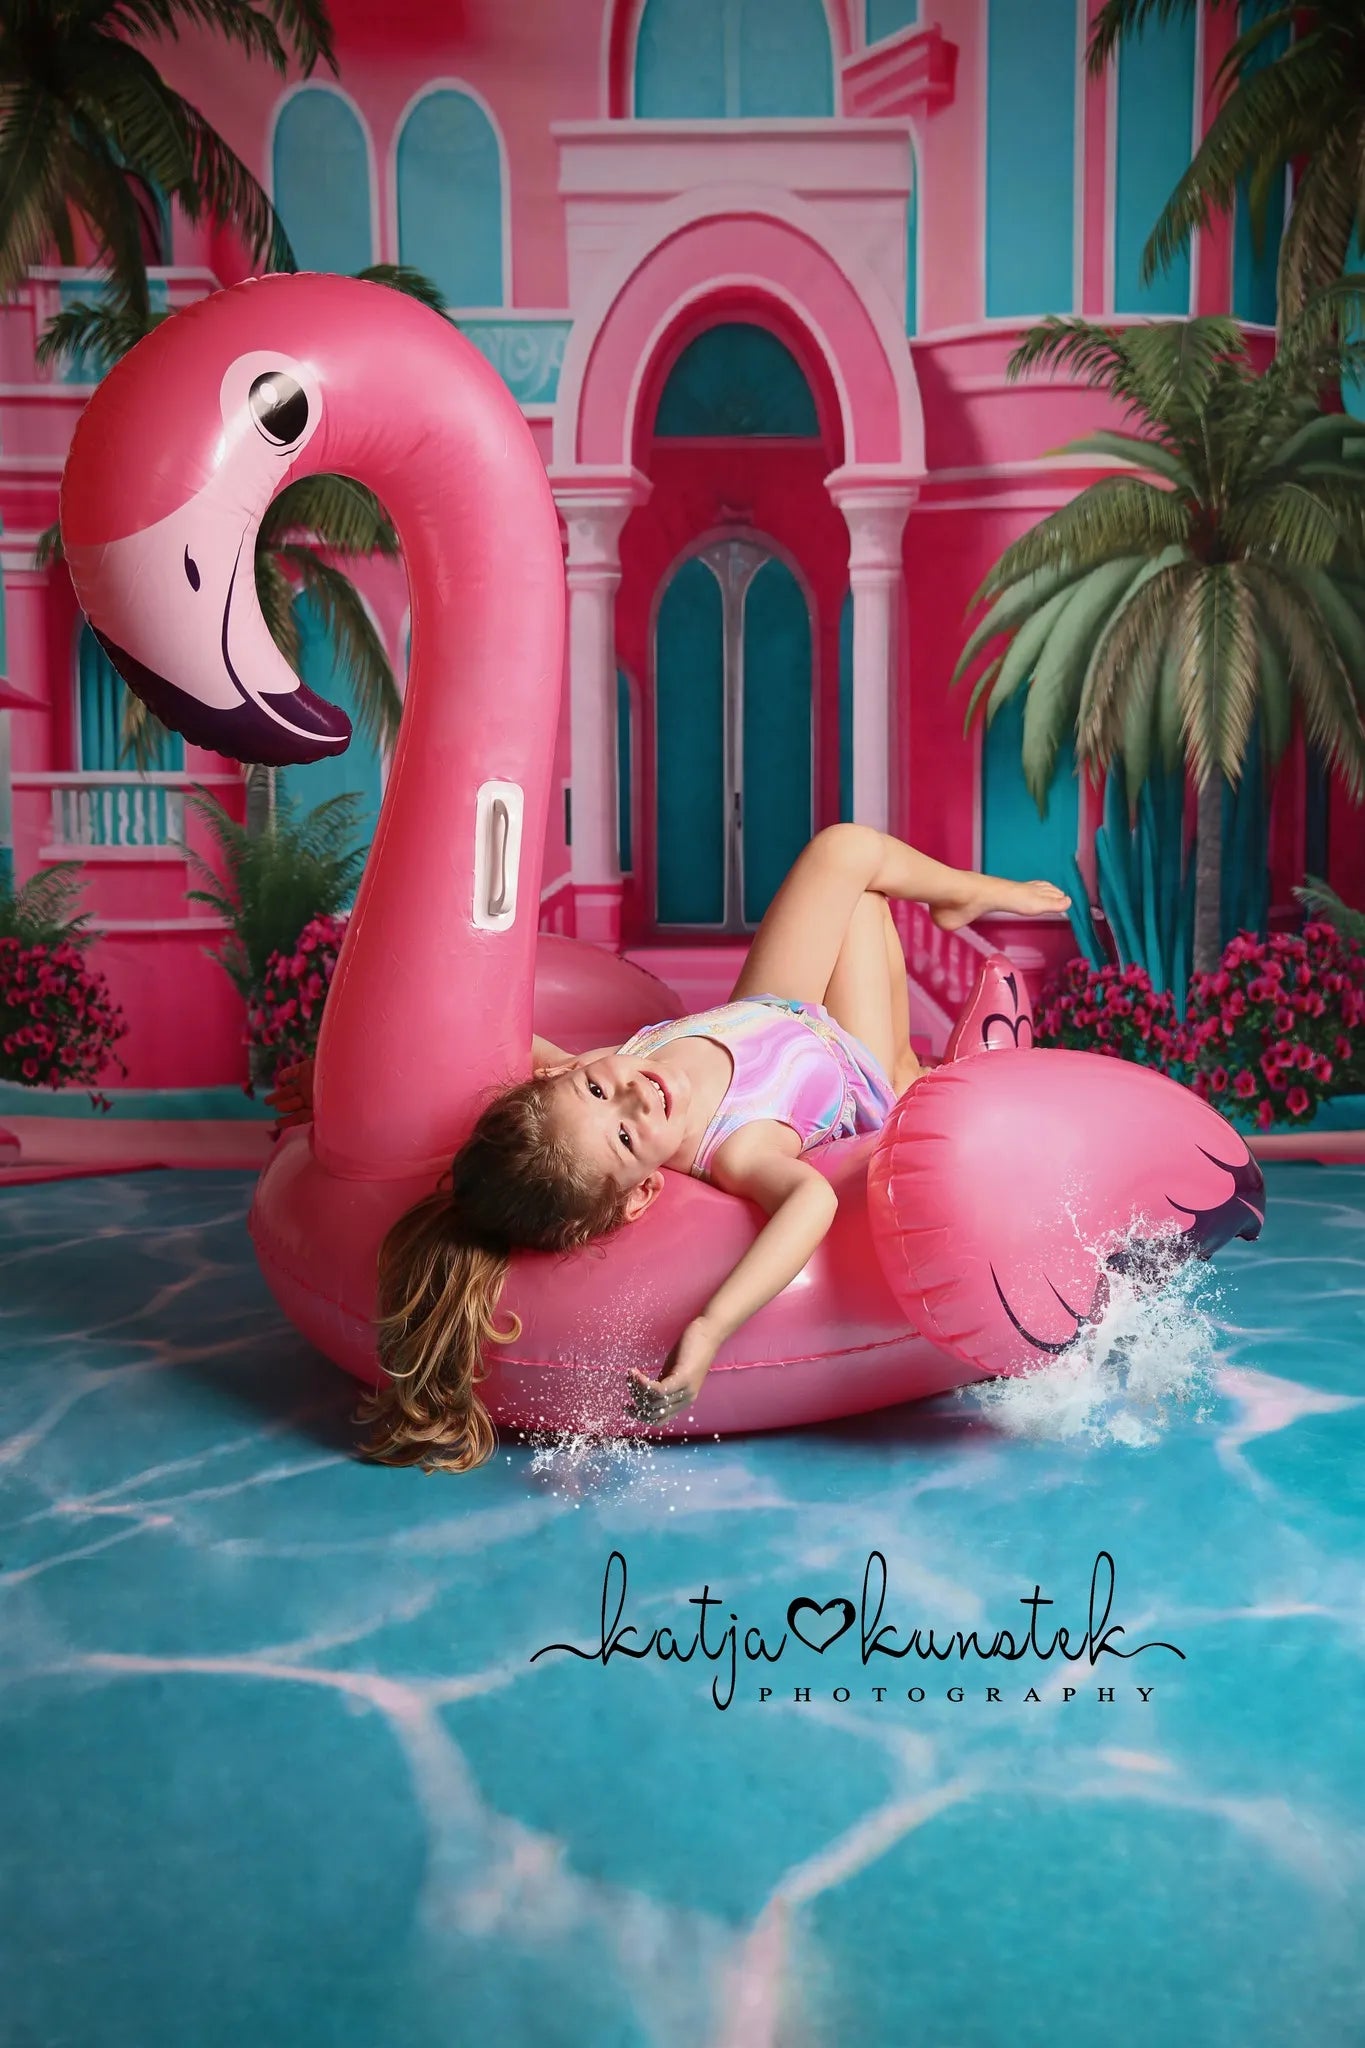 RTS Kate Summer Pool Party Dolly Dream Backdrop Designed by Ashley Paul